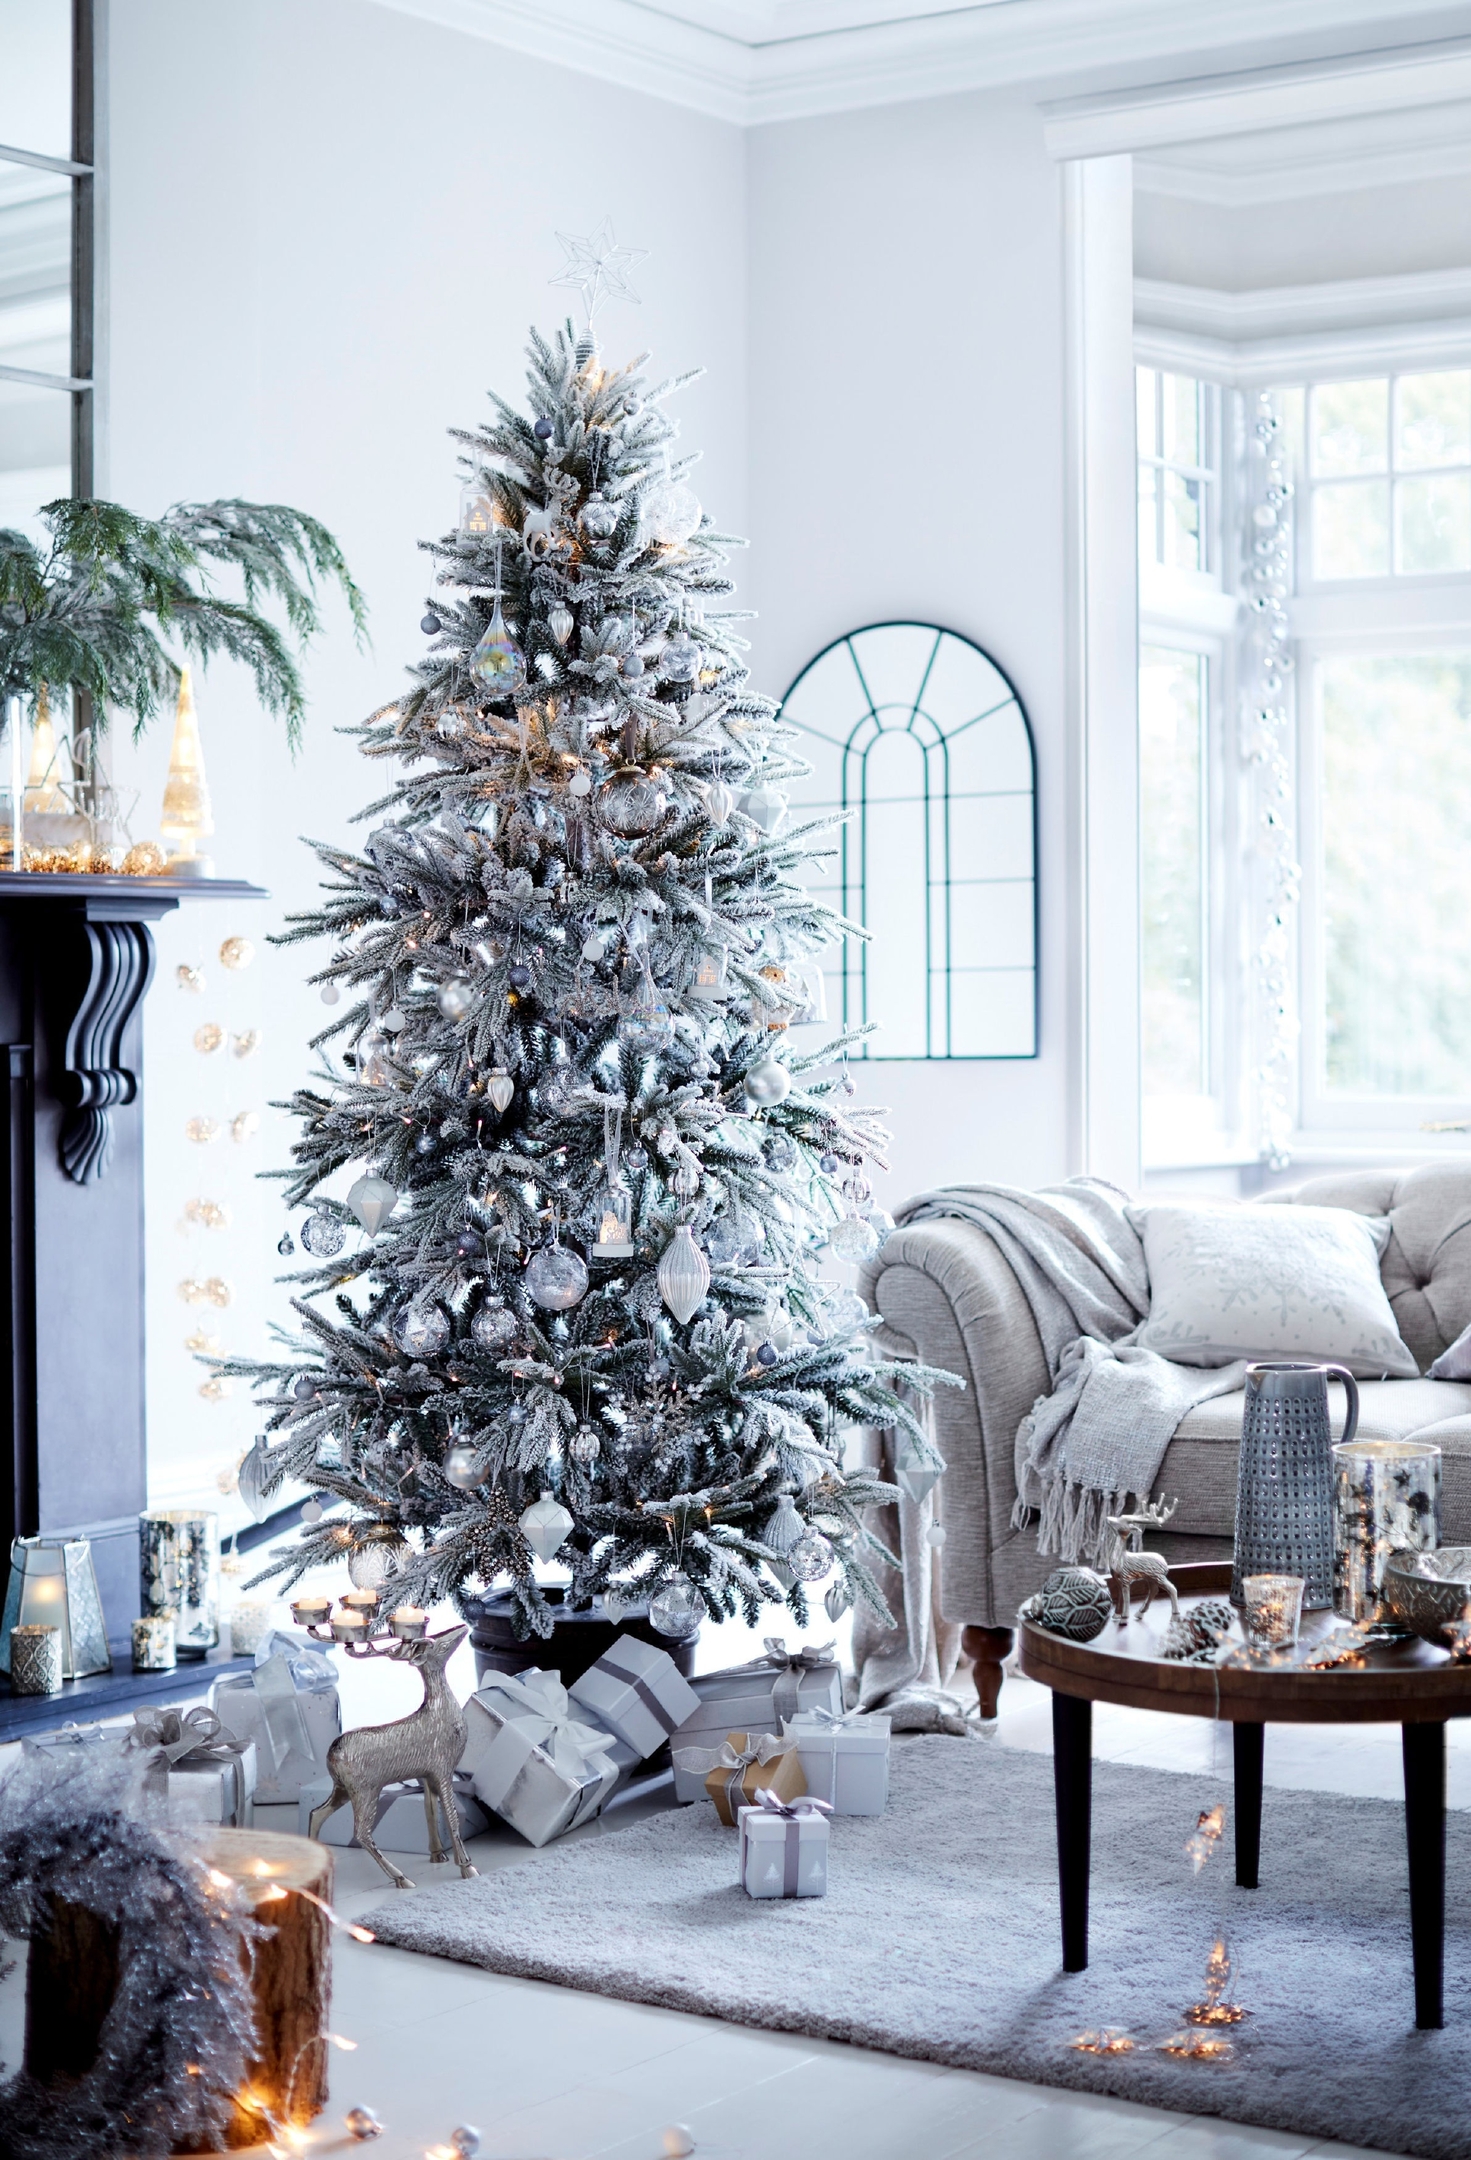 Interiors: Tree-mendous ideas for a stunning Christmas home